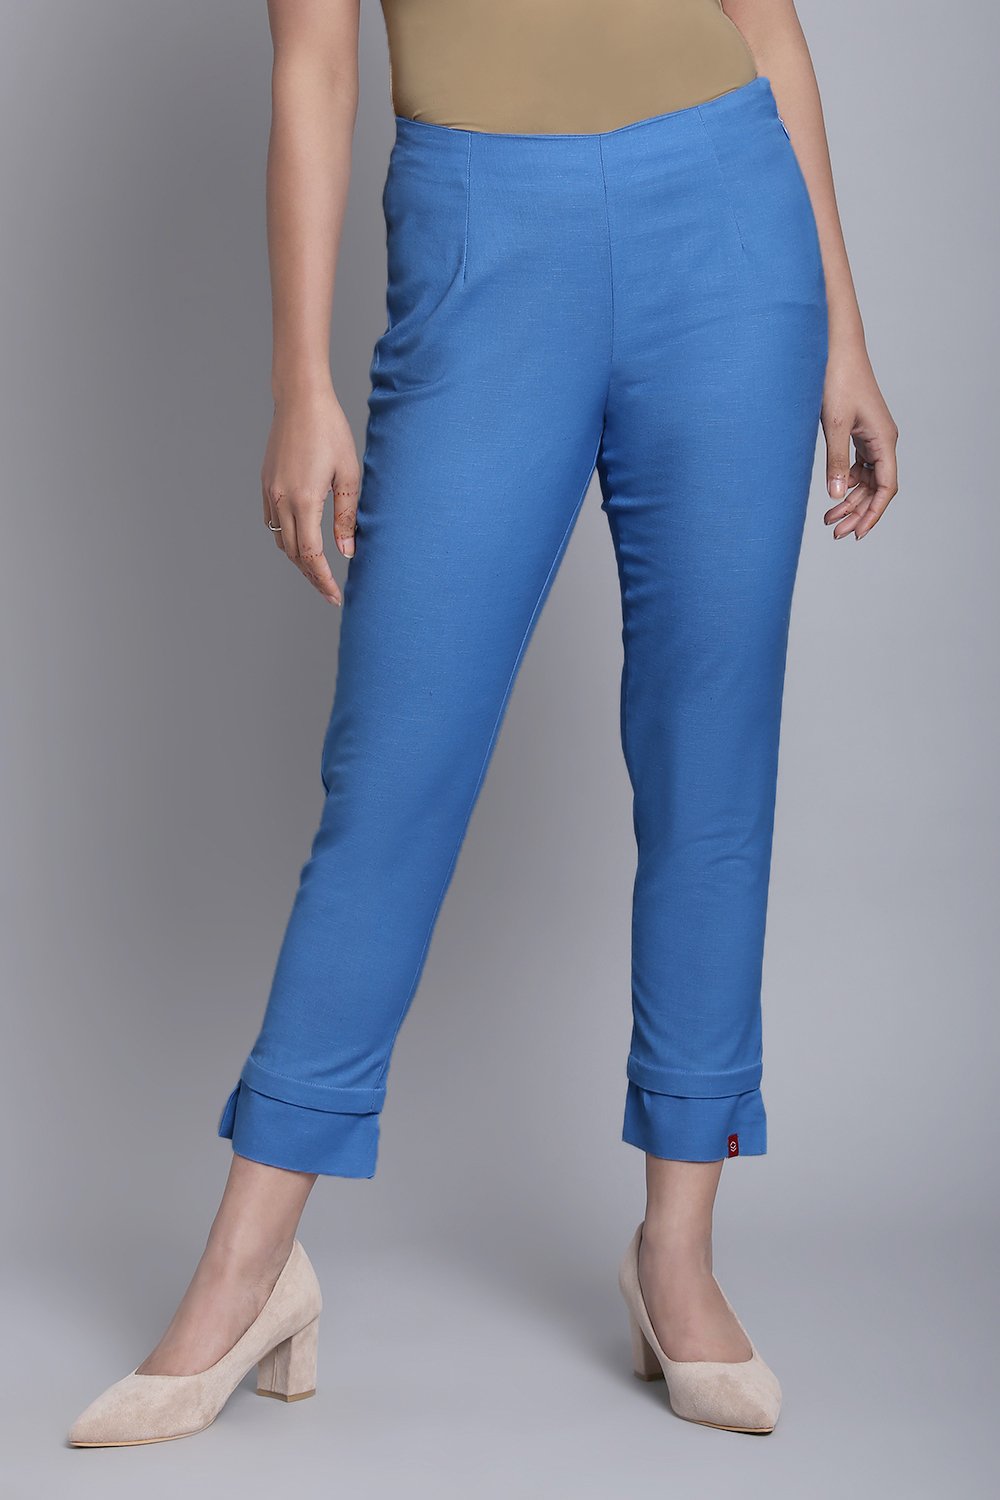 Navy Blue Cotton Flax Pants image number 0